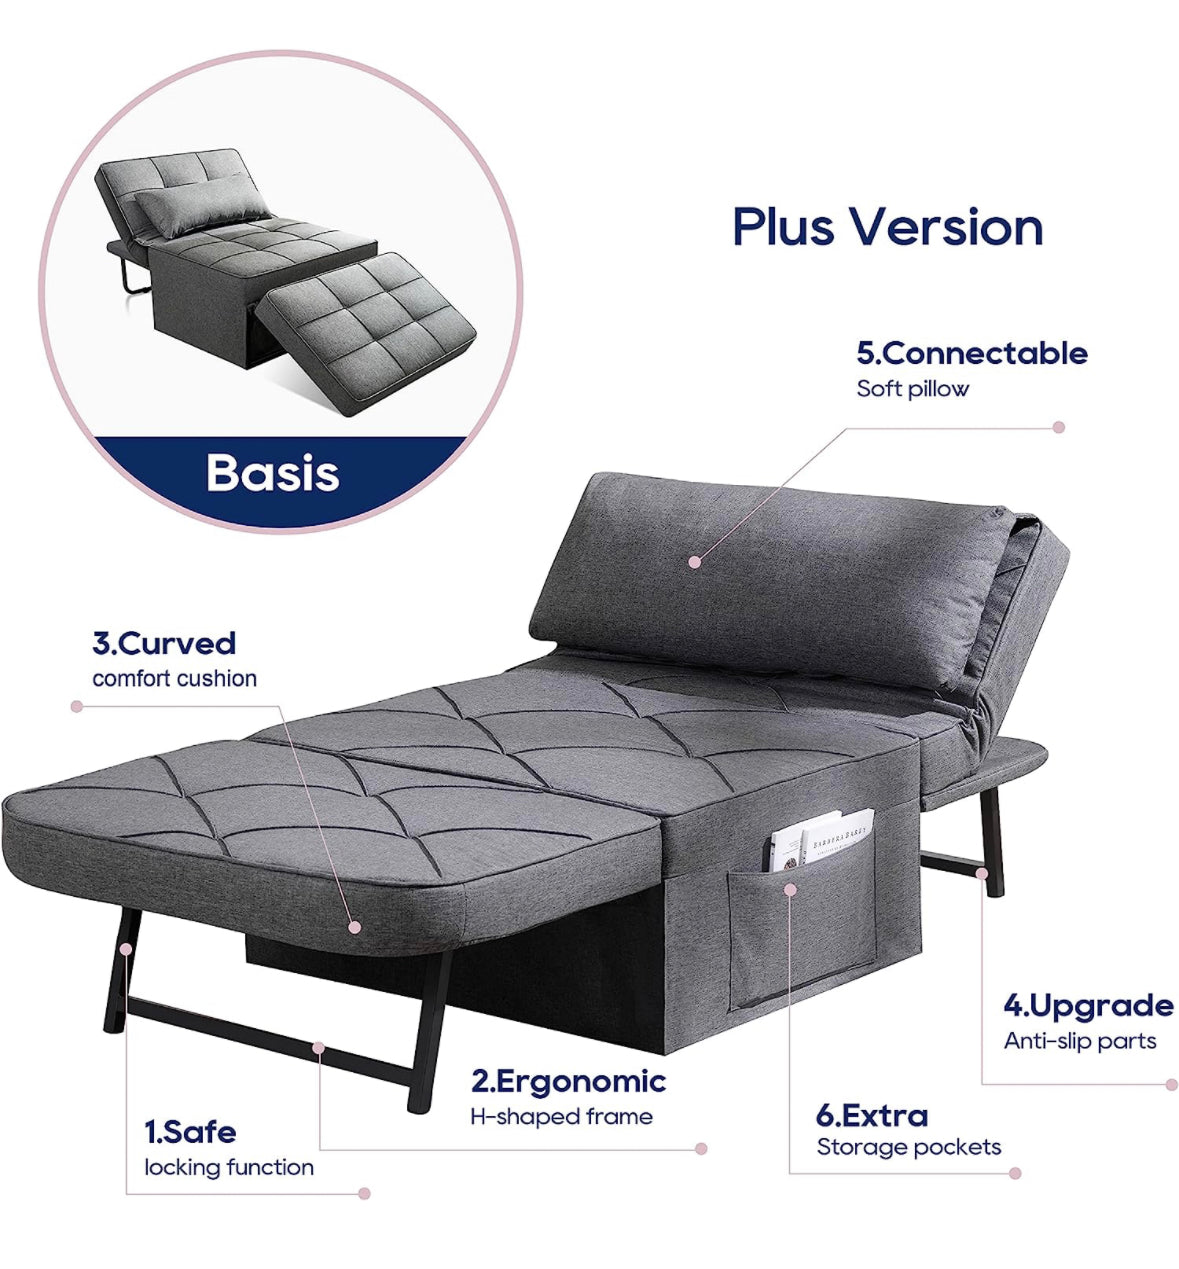 889 DÉCO 4-in-1 multifunctional sofa bed